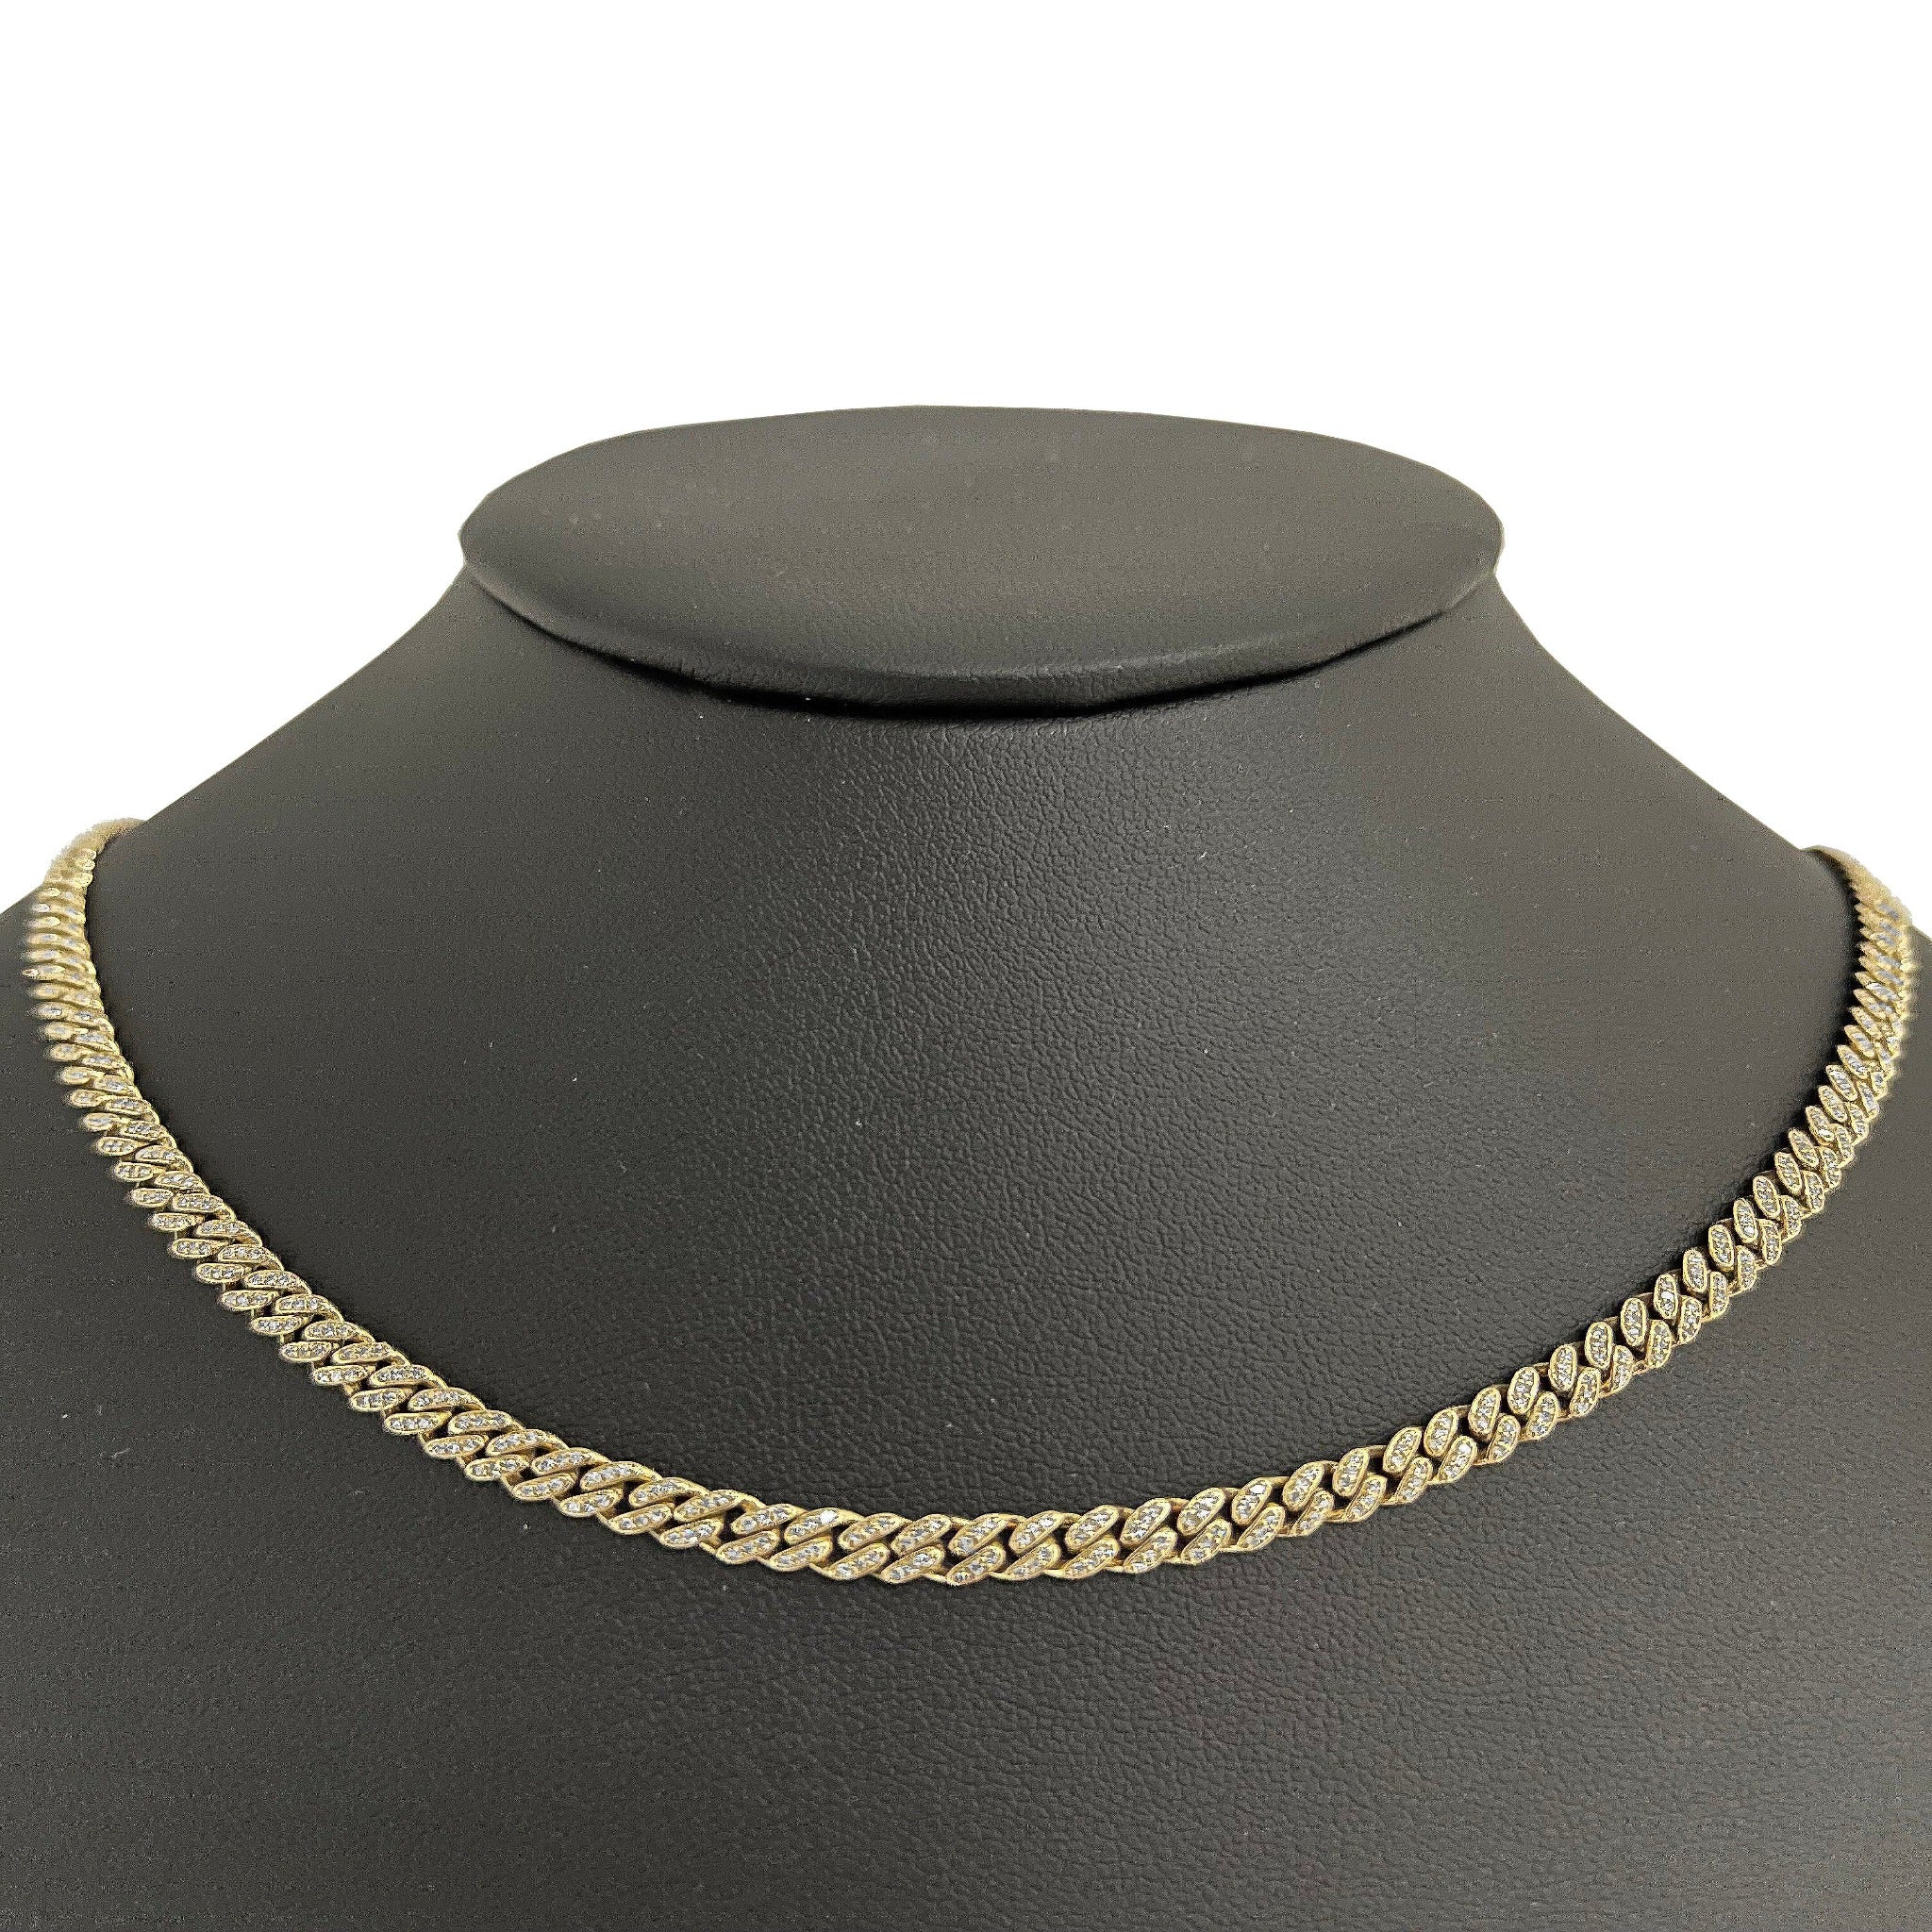 ''SPECIAL! 4mm 1.66ct 14k Yellow GOLD Diamond Round Cuban Necklace 18''''''